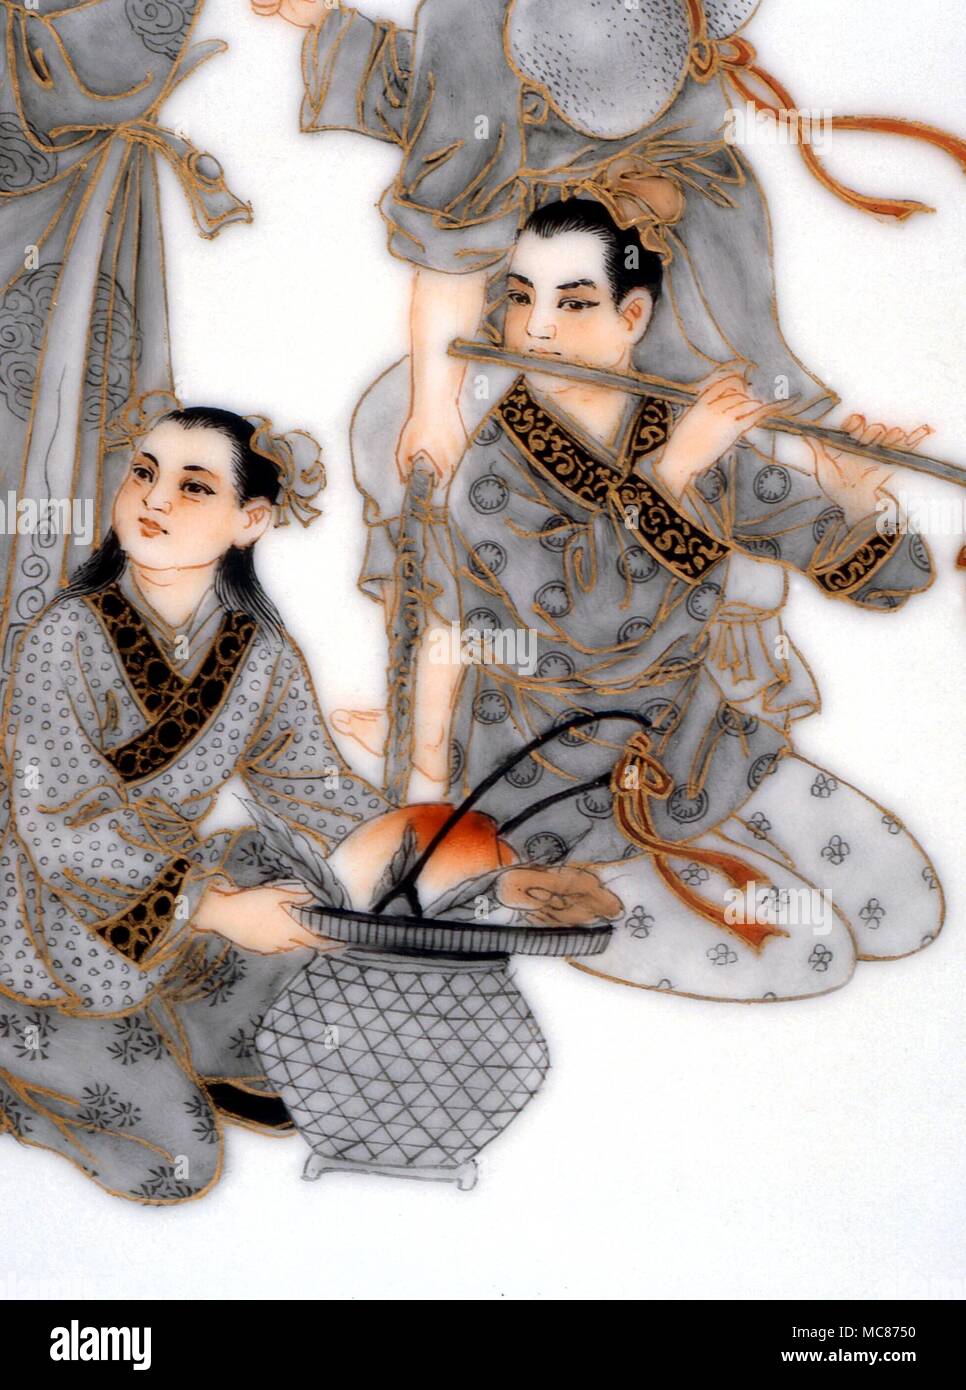 Taoism - Two of the Taoist 'Eight Immortals- (Pa Hsien). Lan Ts'ai-ho, with her flower basket, and Han Hsiang-tzu, with his flute. Mid-19th century Chinese tile, from screen Stock Photo